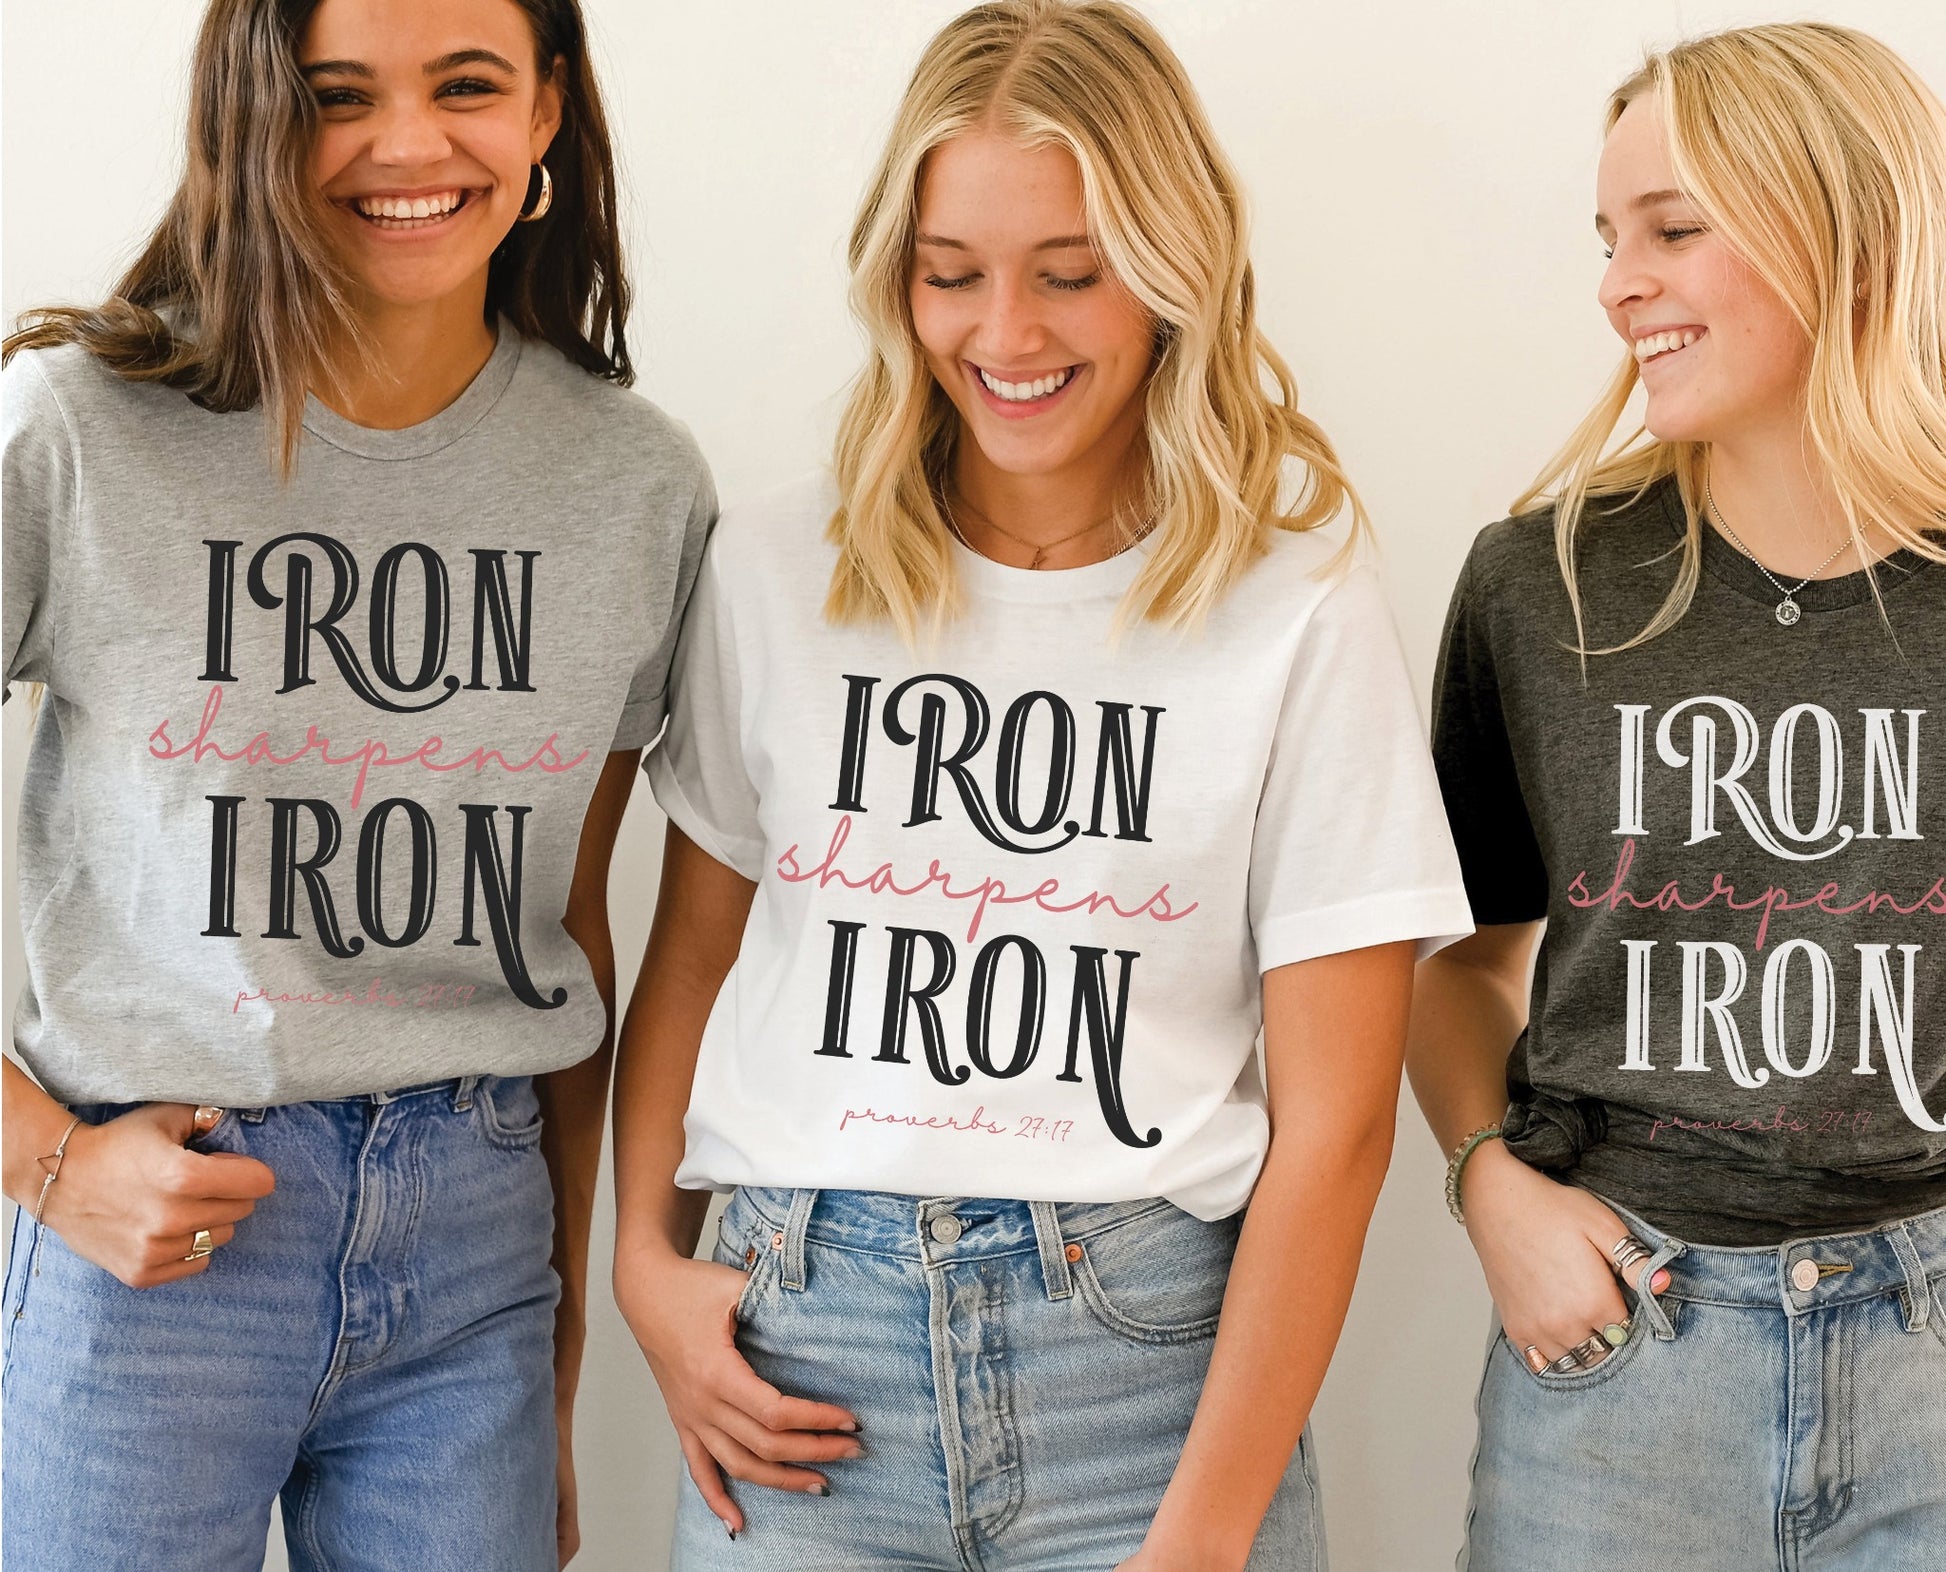 Iron Sharpens Iron Proverbs 27:17 Christian aesthetic design printed in black, white, and mauve on ladies soft unisex t-shirts for women's groups